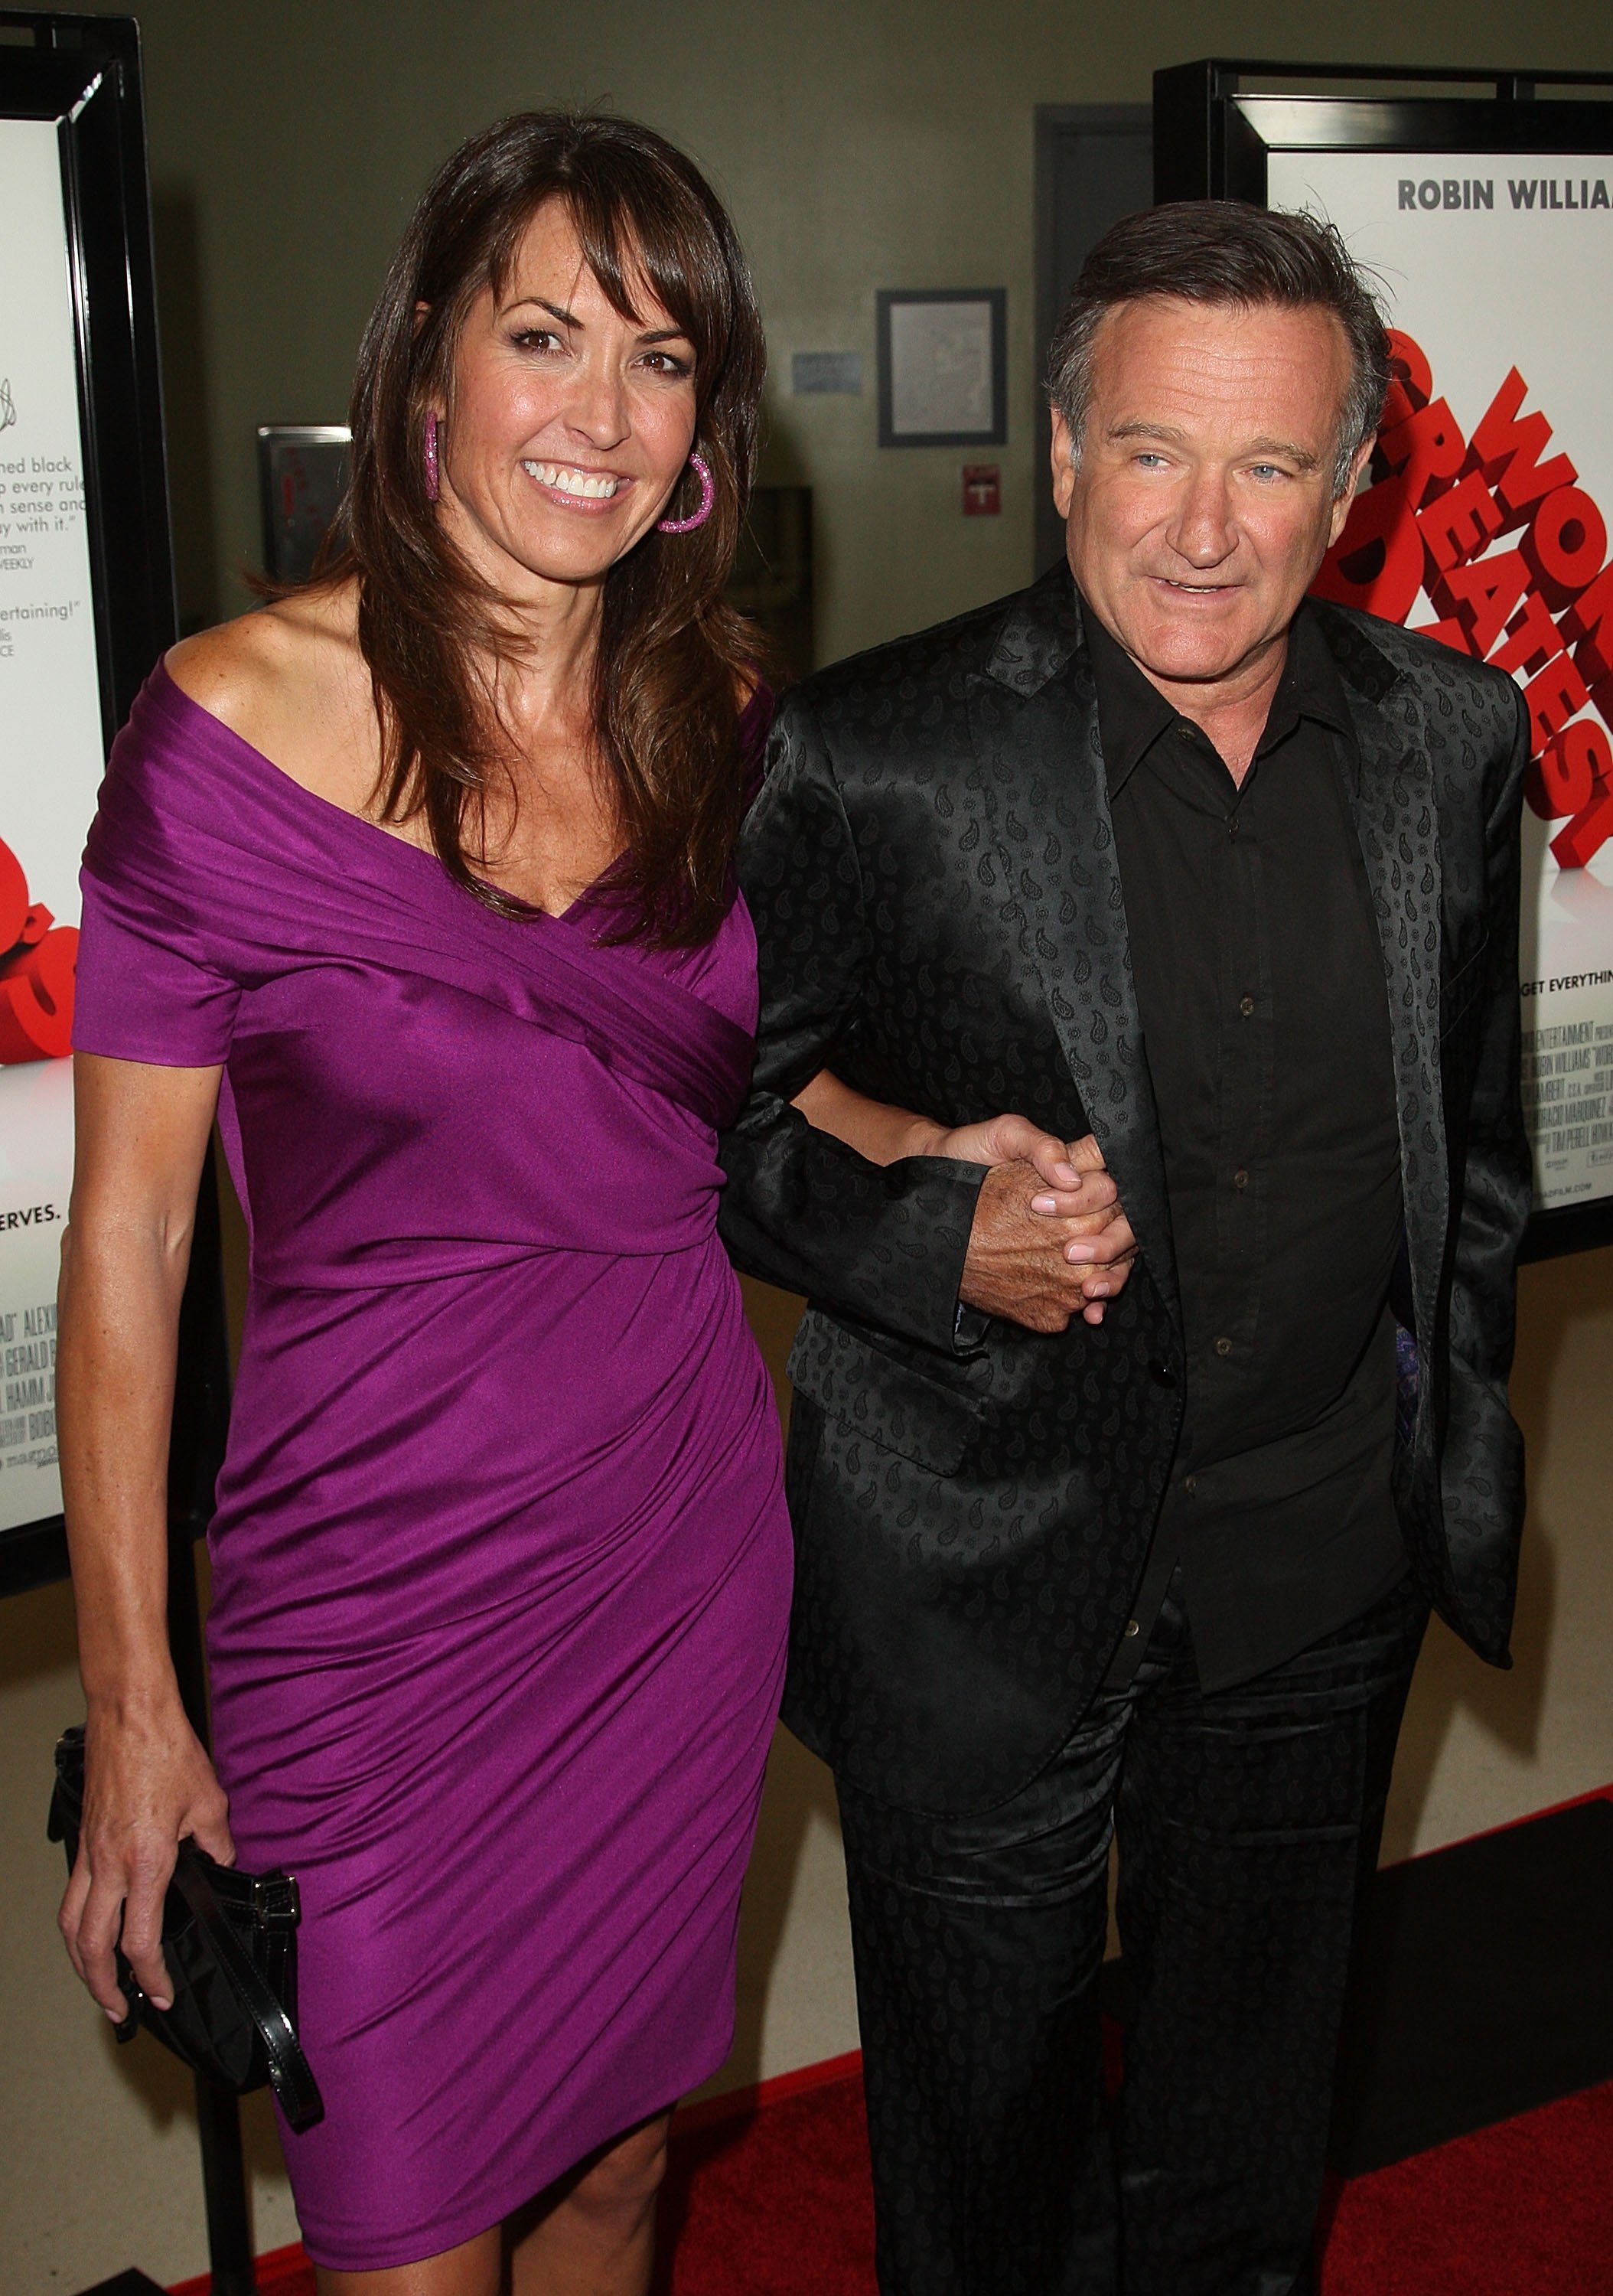 Robin Williams and Susan Schneider pose at the premiere of Magnolia Pictures' 'World's Greatest Dad' at The Landmark Theater on August 13, 2009 in Los Angeles, California | Source: Getty Images 